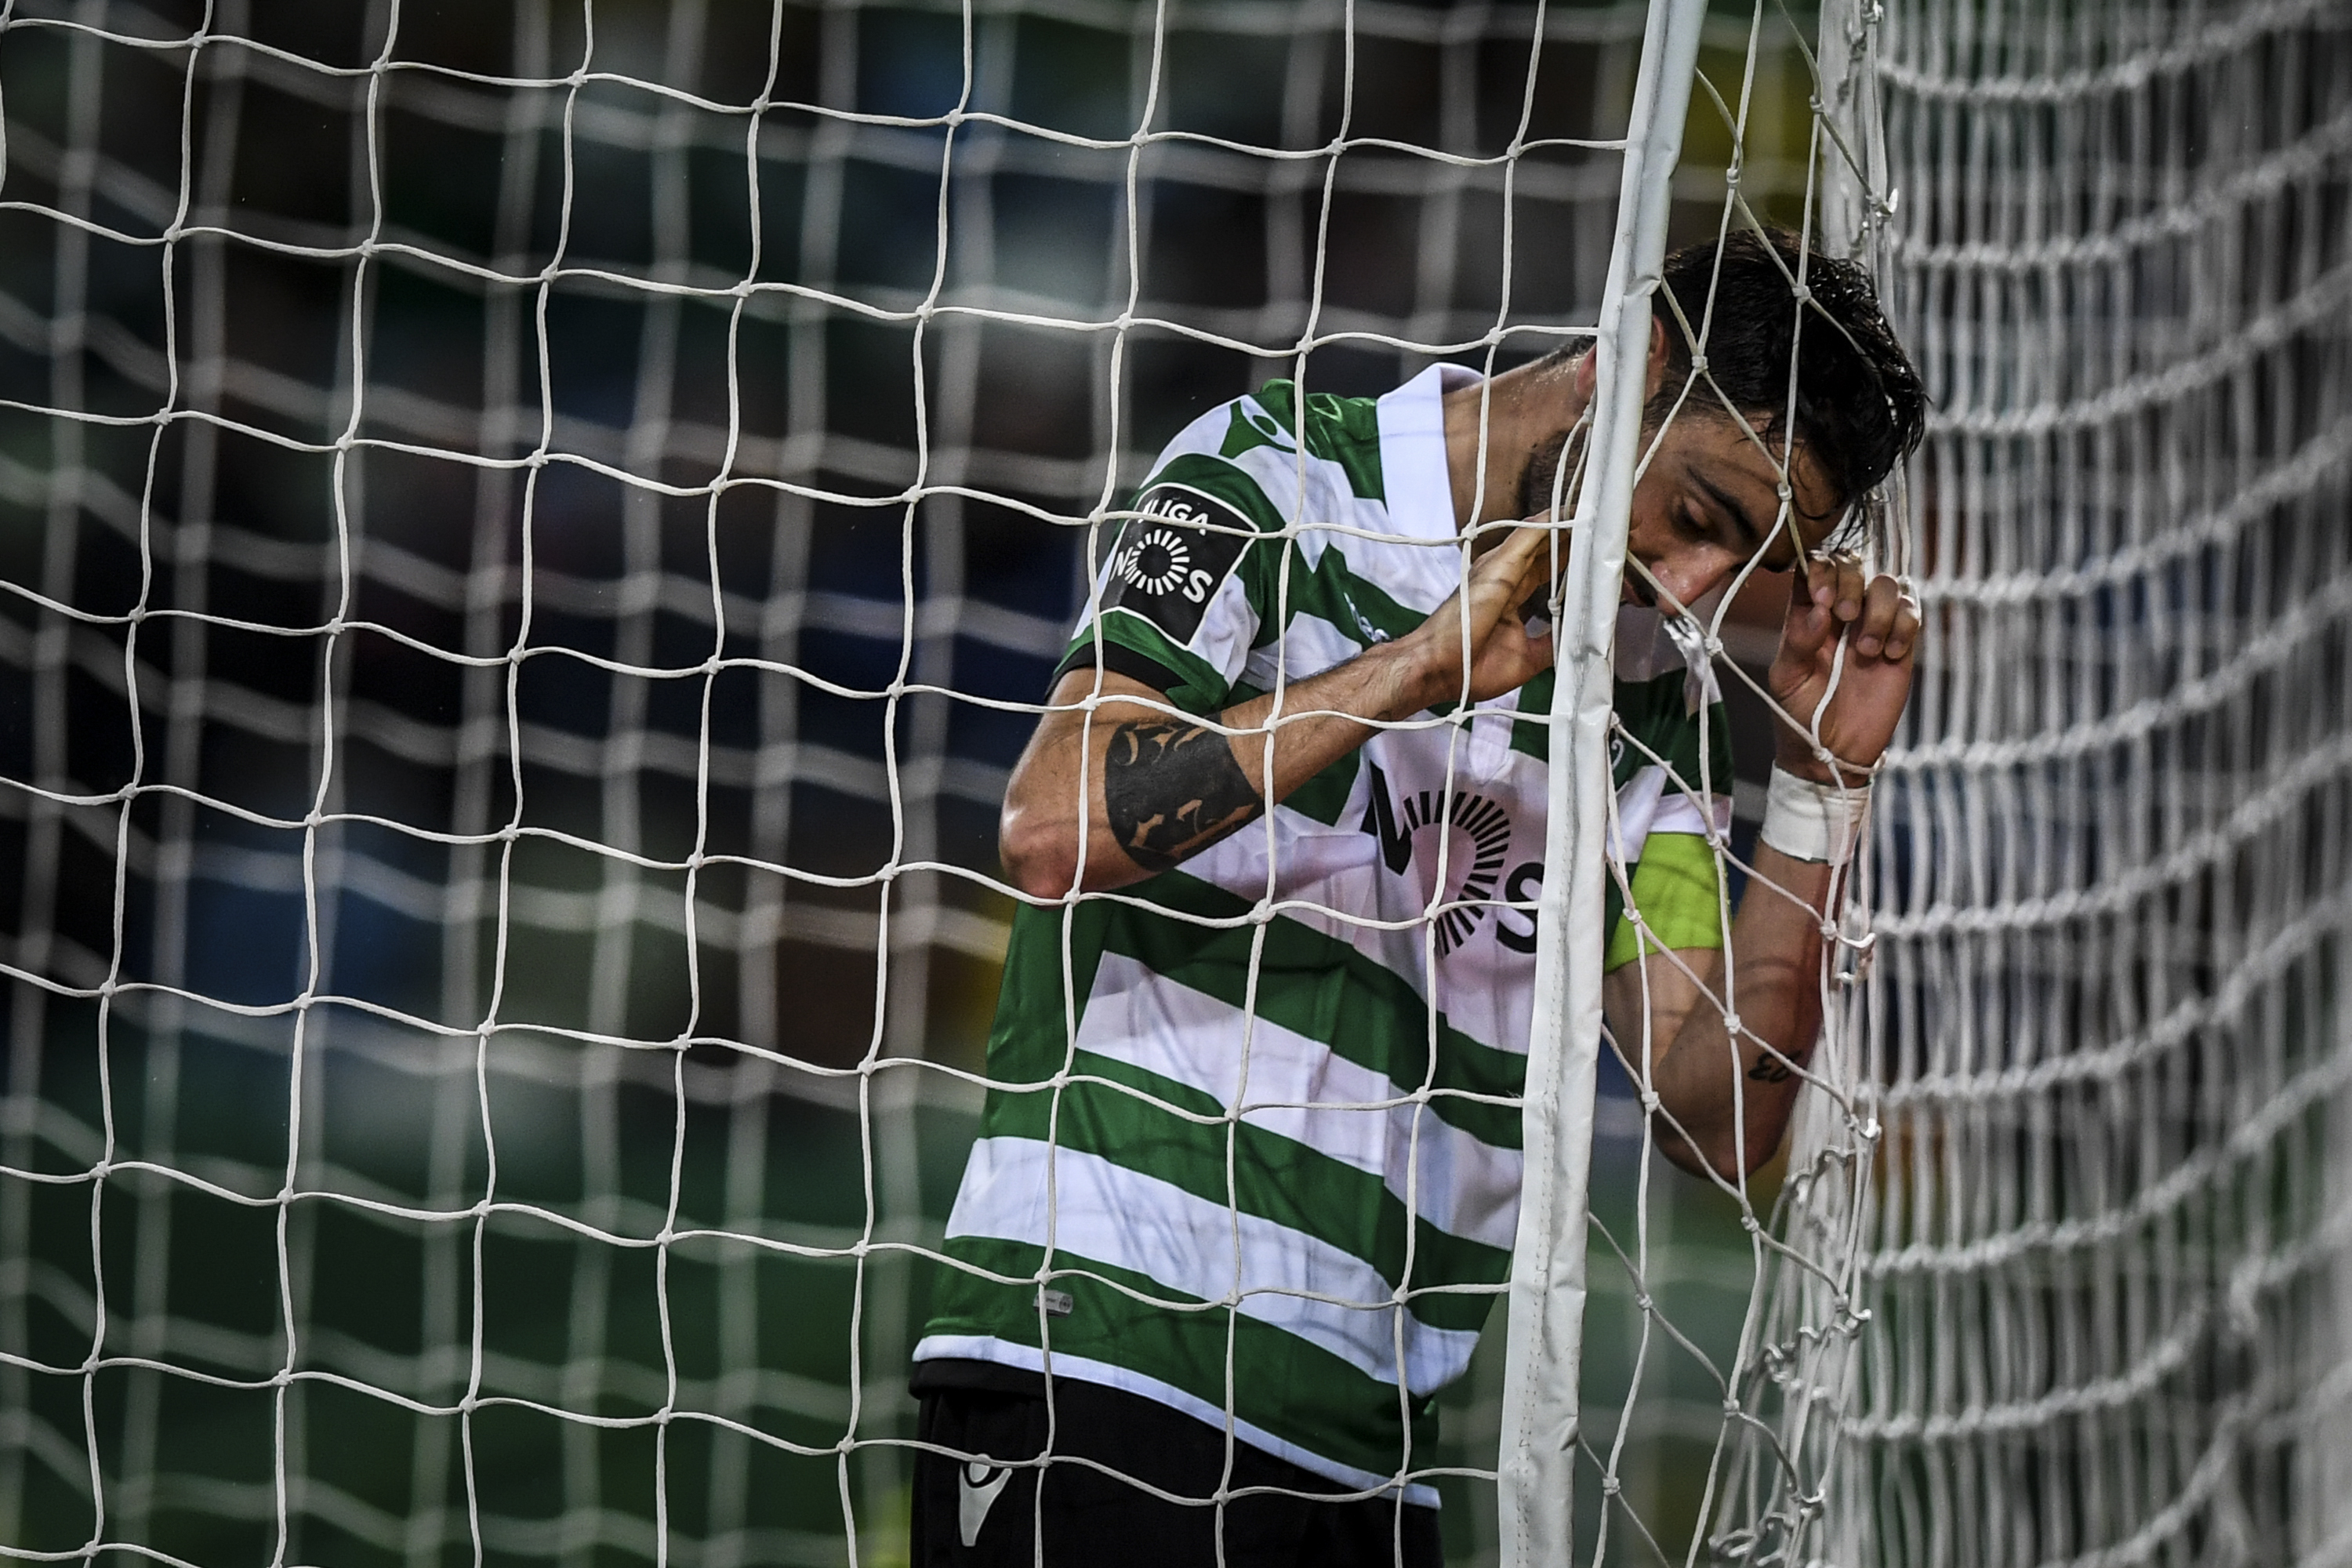 Sporting's Portuguese midfielder Bruno Fernandes reacts after missing a goal opportunity during the Portuguese league football match between Sporting CP and Portimonense SC at the Jose Alvalade stadium in Lisbon on March 3, 2019. (Photo by PATRICIA DE MELO MOREIRA / AFP)        (Photo credit should read PATRICIA DE MELO MOREIRA/AFP/Getty Images)